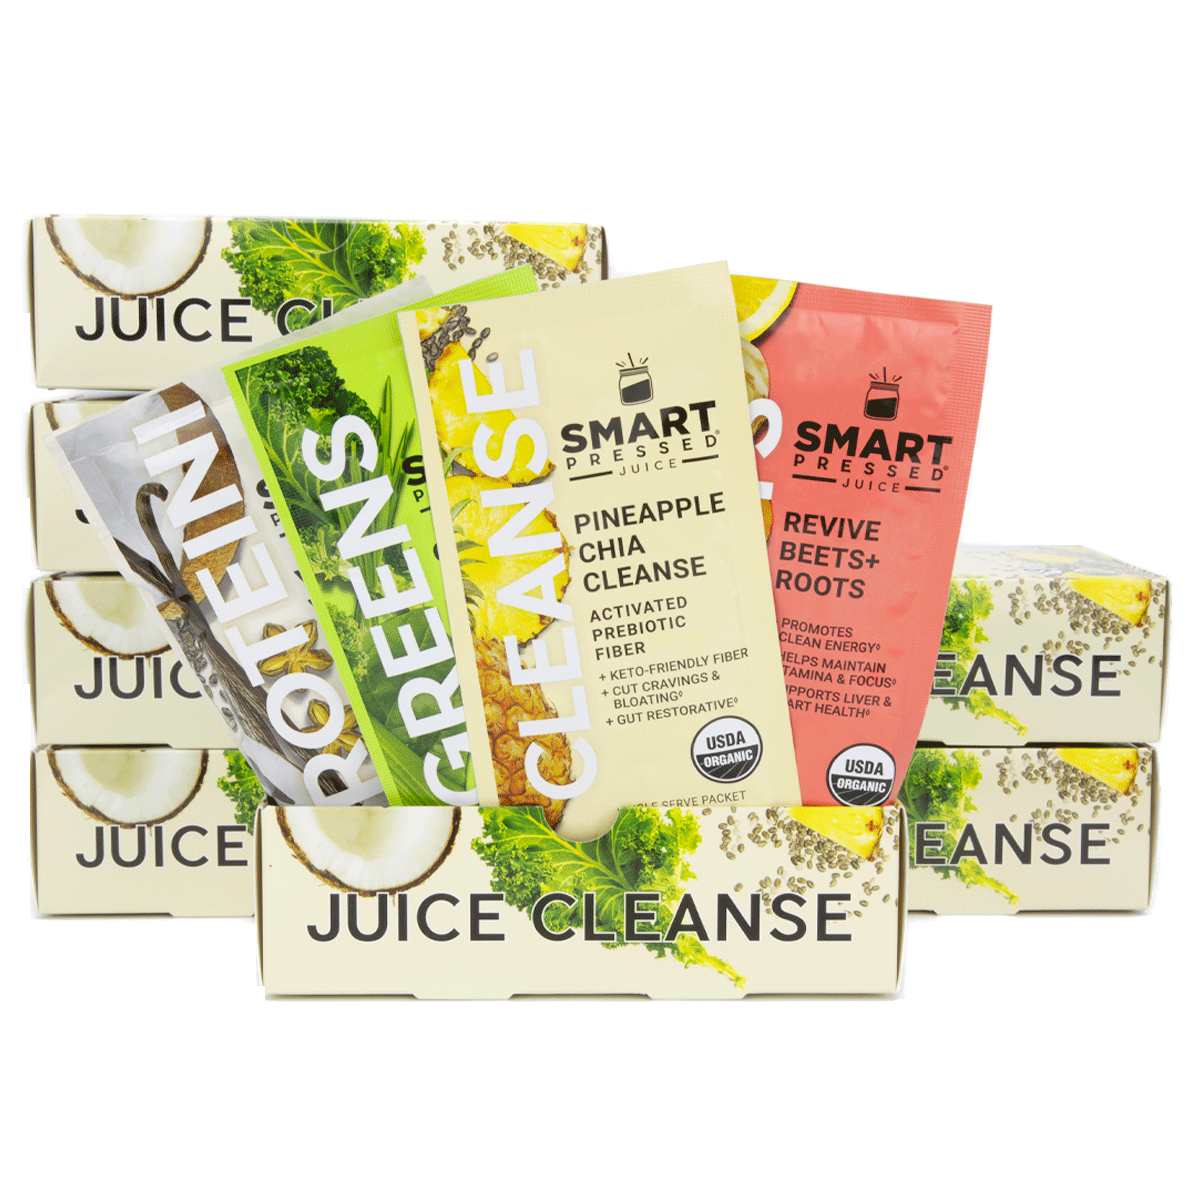 Single serving packs of Vegan Vanilla Proteini, Organic Pressed Greens, Pineapple Chia Cleanse, and Revive Beet+Roots in front of stacked boxes of Juice Cleanse against a white background.